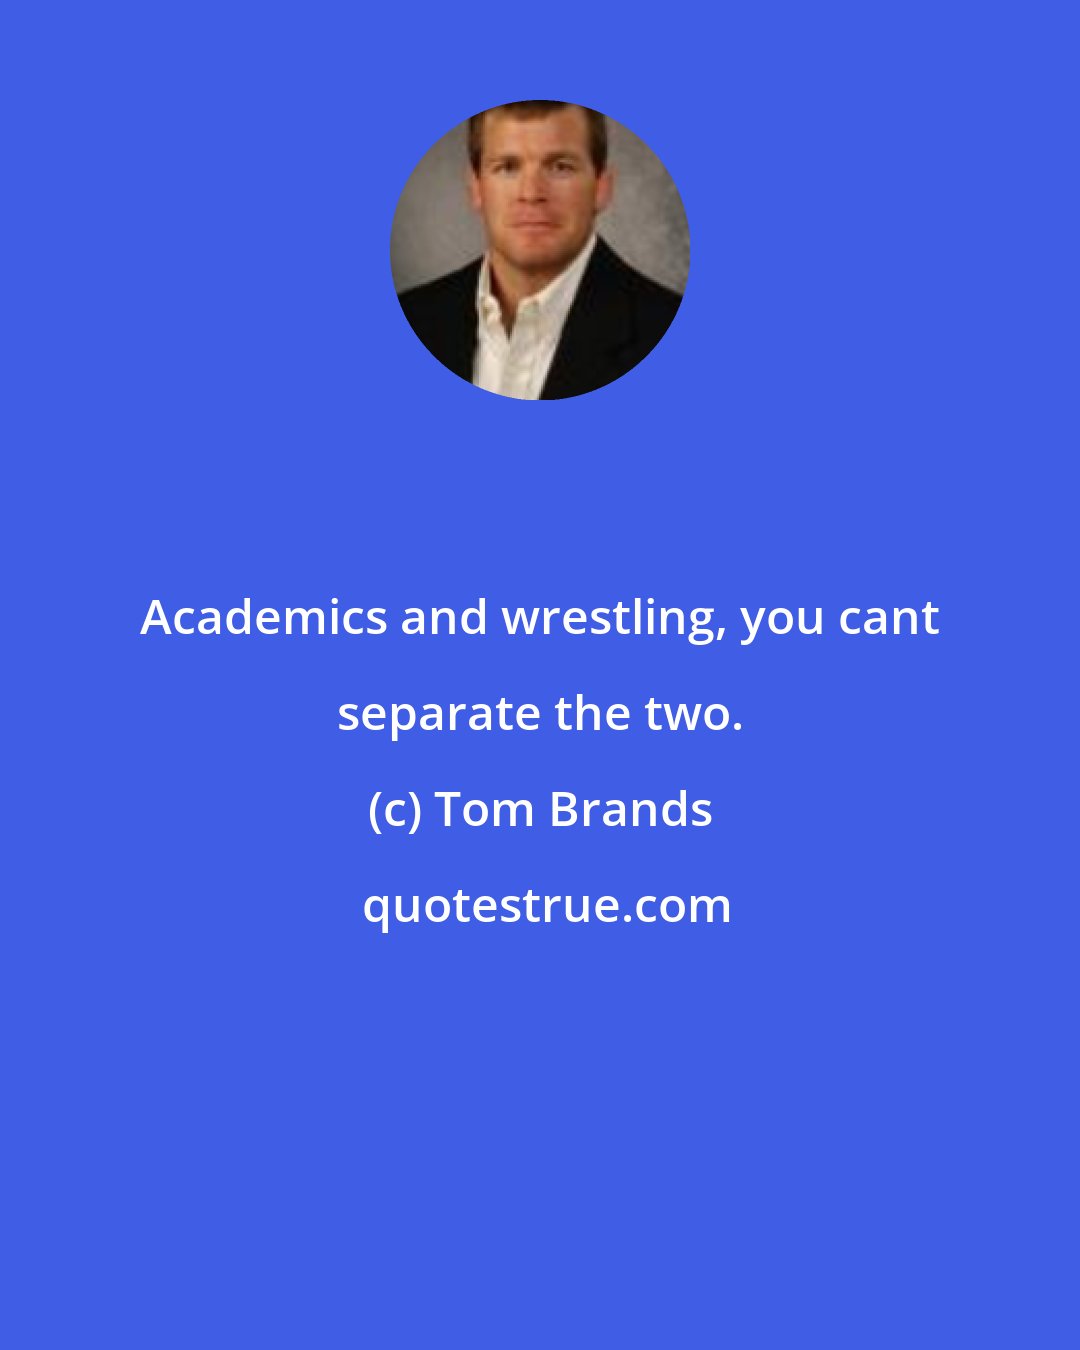 Tom Brands: Academics and wrestling, you cant separate the two.